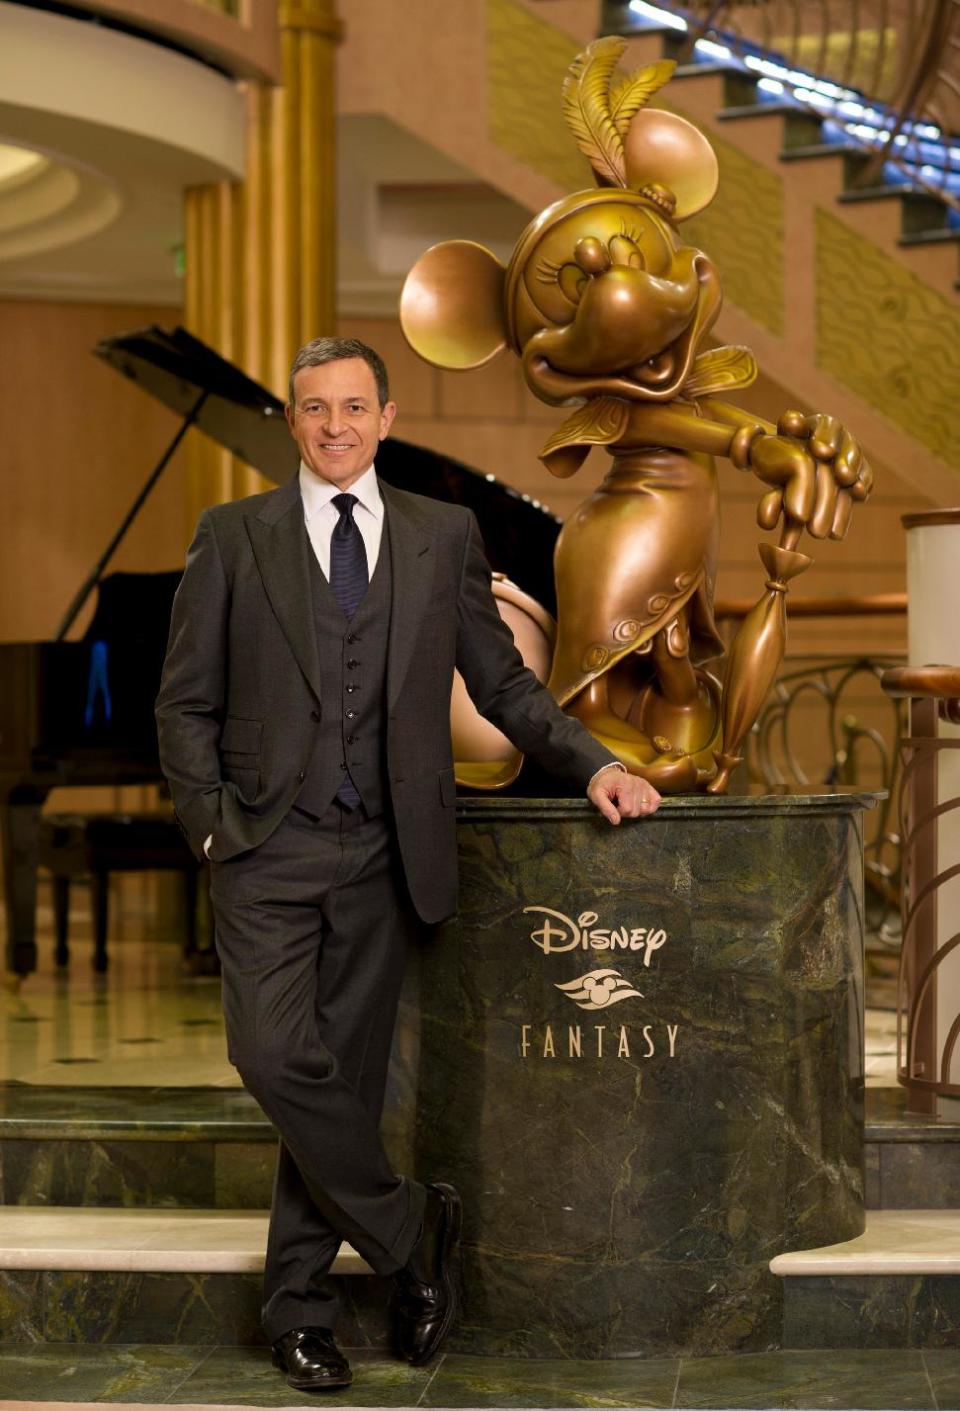 In this photo provided by the Walt Disney Company, Disney President and CEO Robert A. Iger poses for photos aboard the newest ship of Disney Cruise Line, the Disney Fantasy, at a star-studded christening gala held Thursday, March 1, 2012 in New York. The 4,000-passenger, 14-deck ship with its distinctive mouse ears logo arrived in New York Tuesday after traveling nearly 3,800 miles across the Atlantic Ocean from the shipyards where it was built in Bremerhaven, Germany. The ship will sail on seven-night Caribbean cruises starting March 31 from Port Canaveral, Fla. (AP Photo/Disney, Kent Phillips)